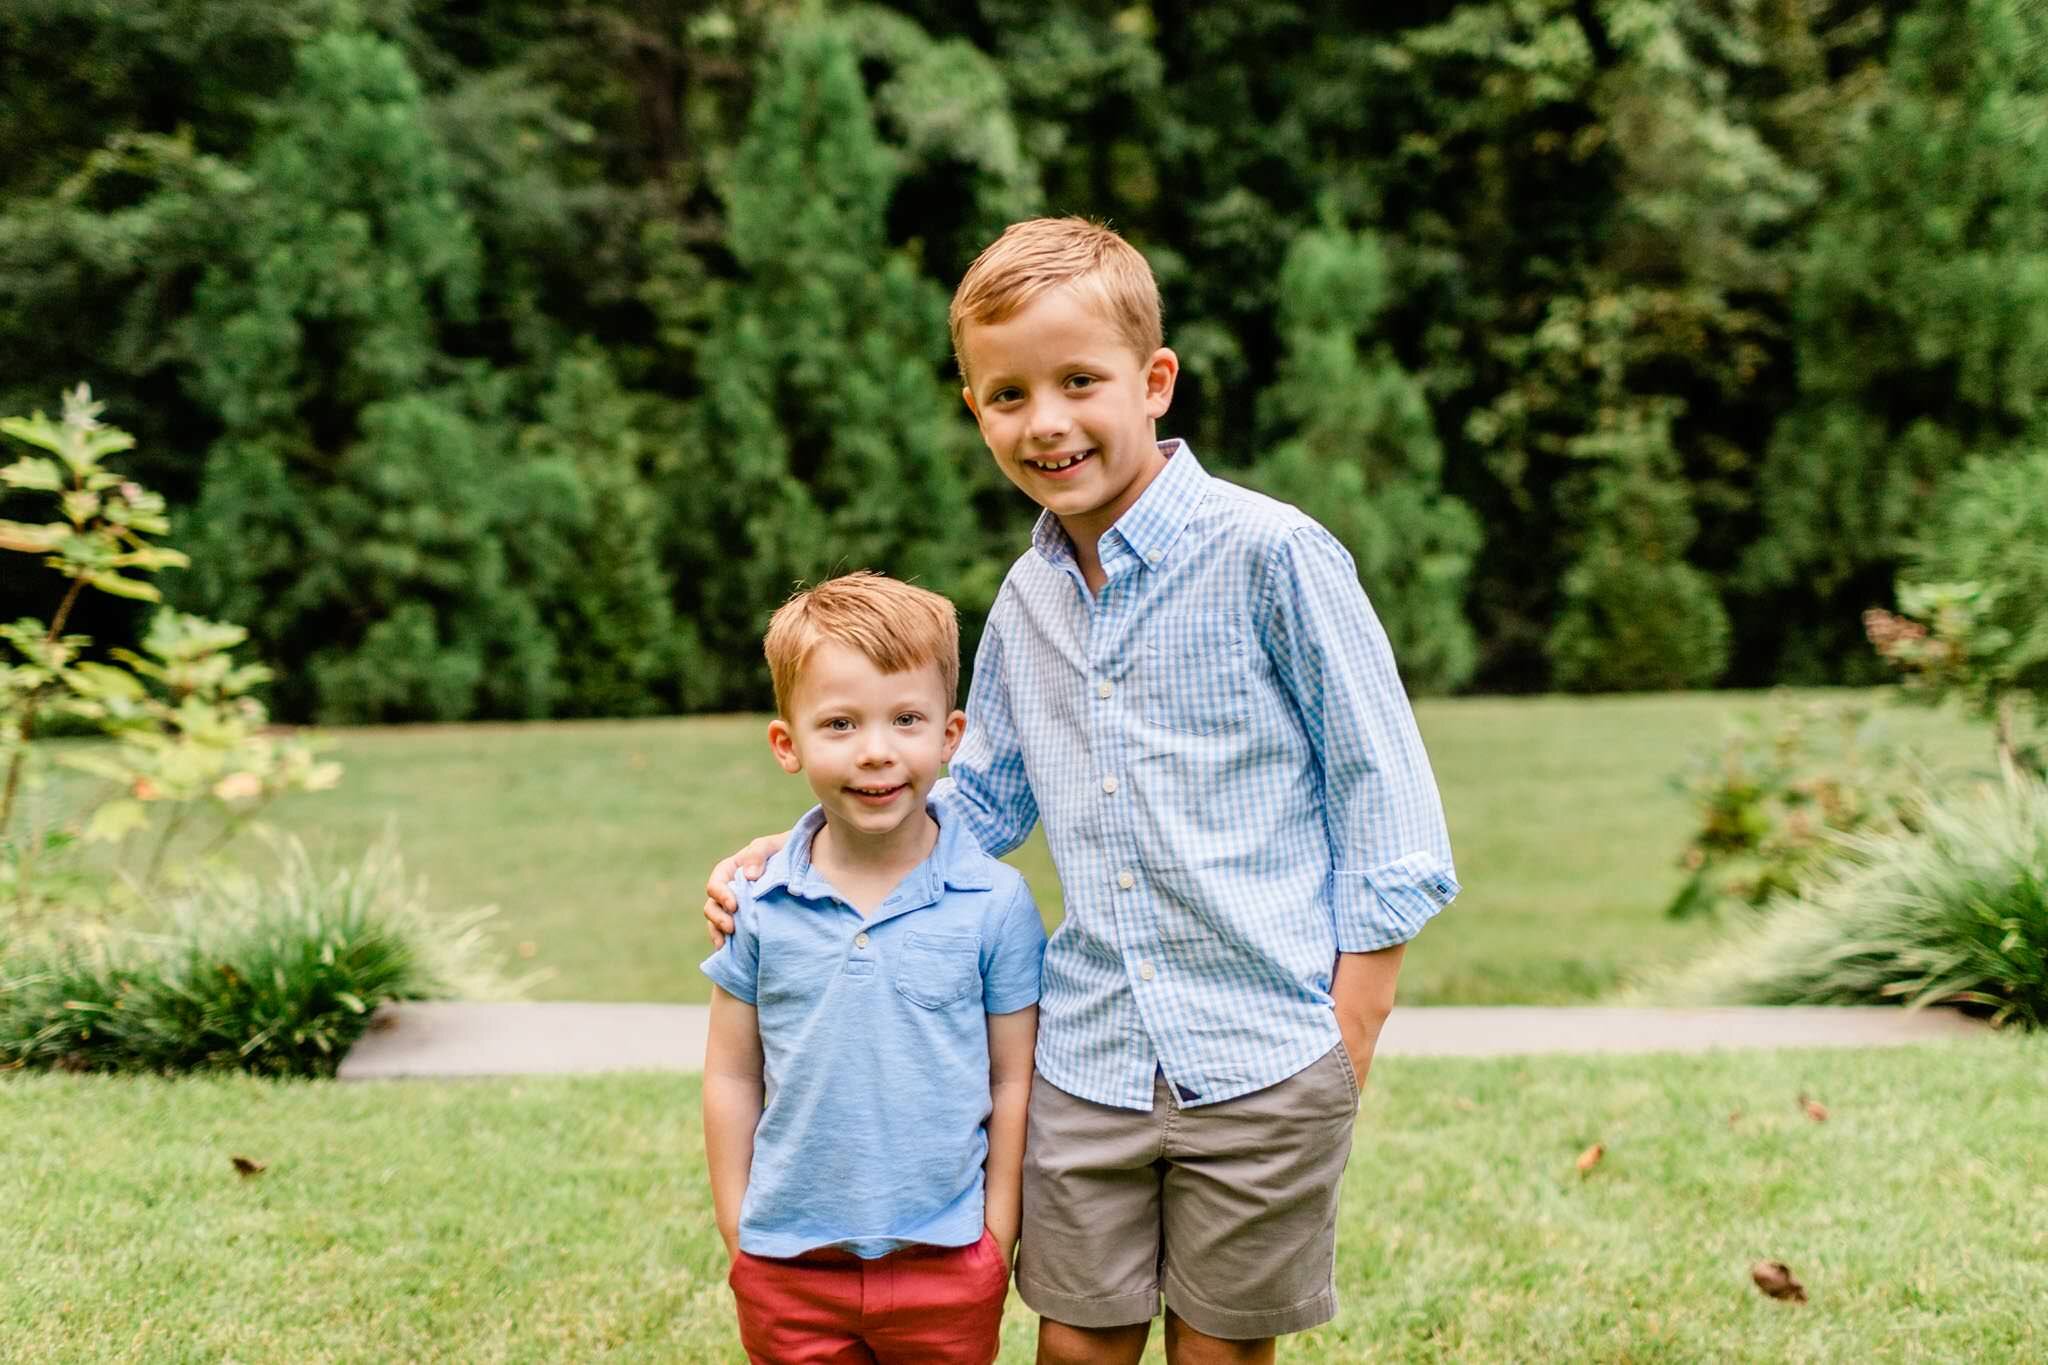 Raleigh Family Photographer | By G. Lin Photography | Two young boys standing together